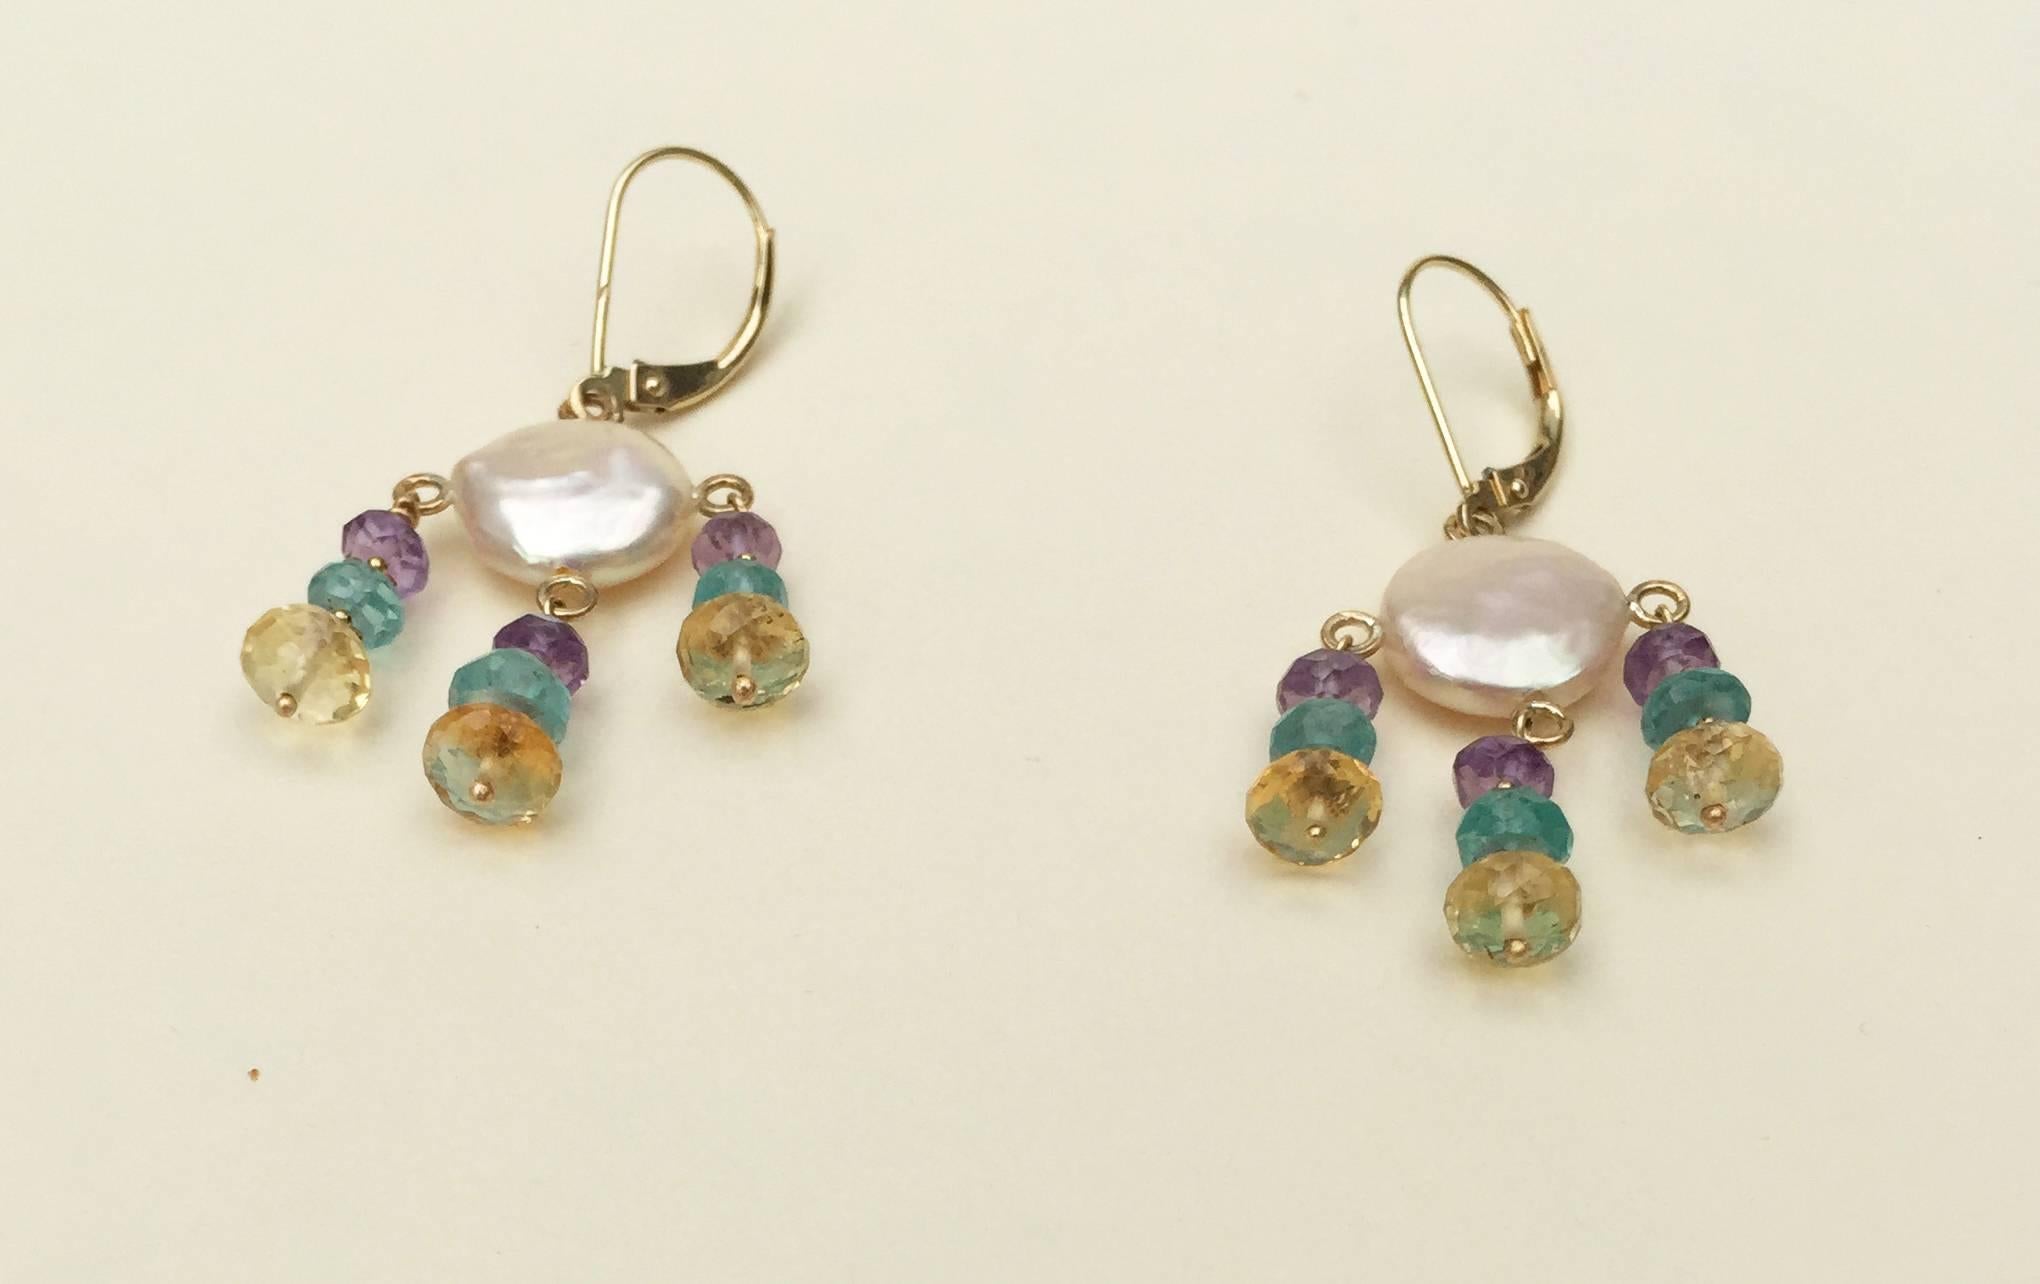 Bead White Pearl Earrings with Amethyst, Topaz, Citrine and 14 Karat Gold by Marina J For Sale